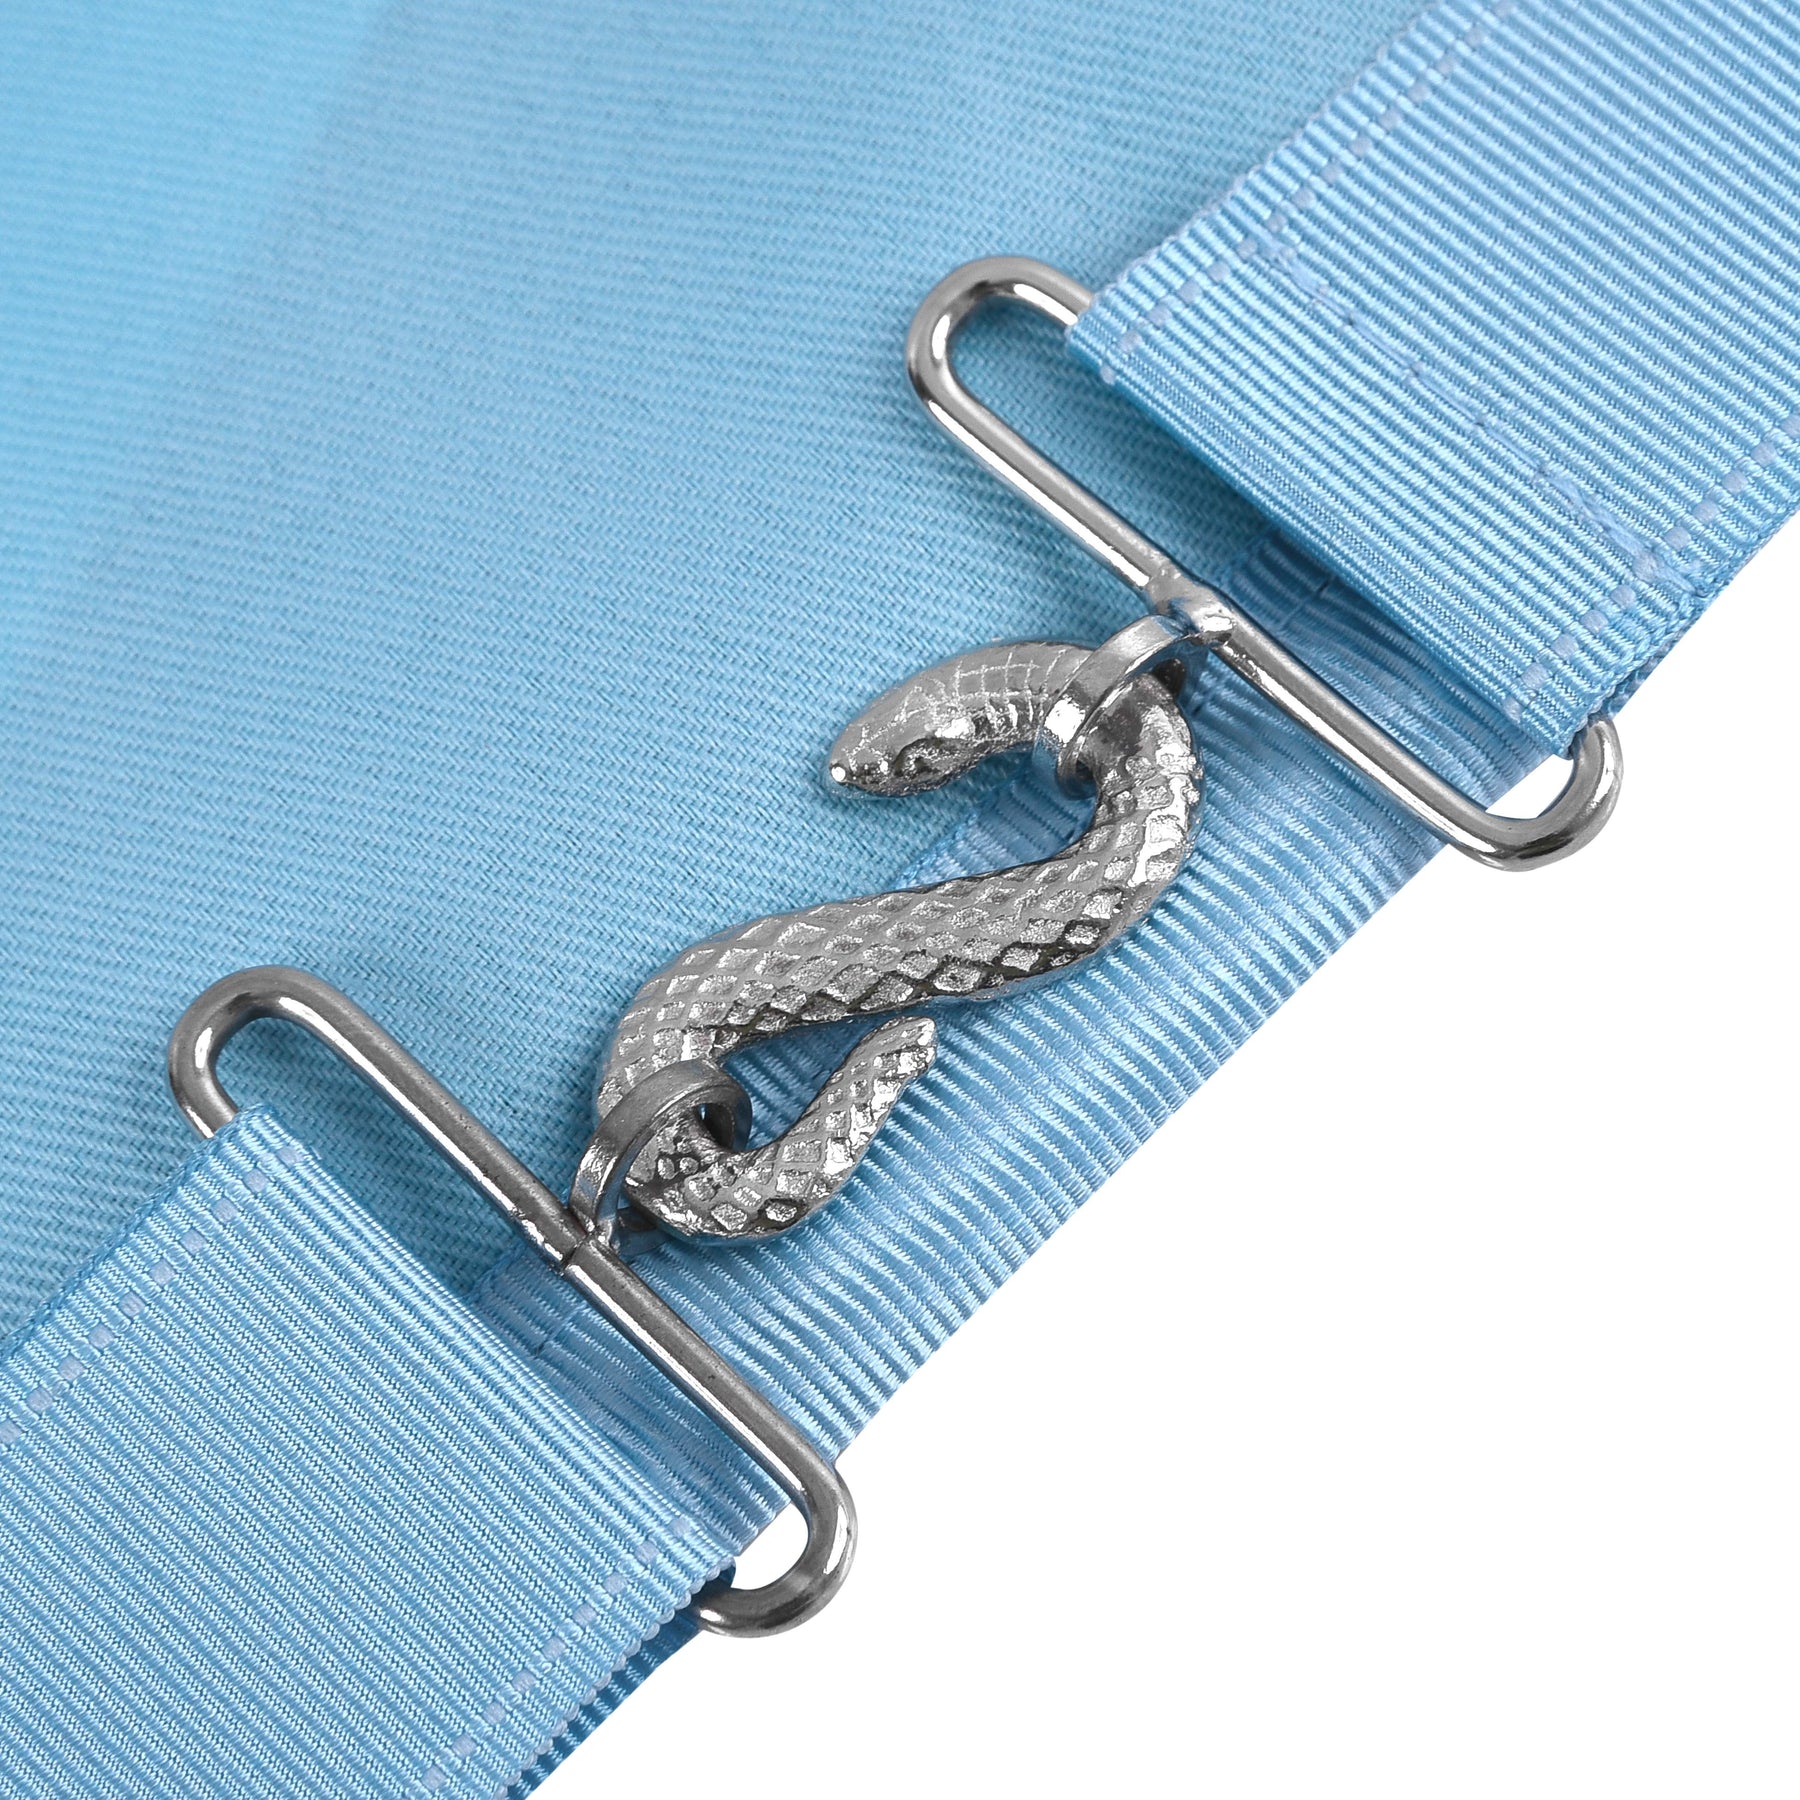 Past Master Blue Lodge California Regulation Apron - Turquoise Blue With Silver Hand Embroidery - Bricks Masons